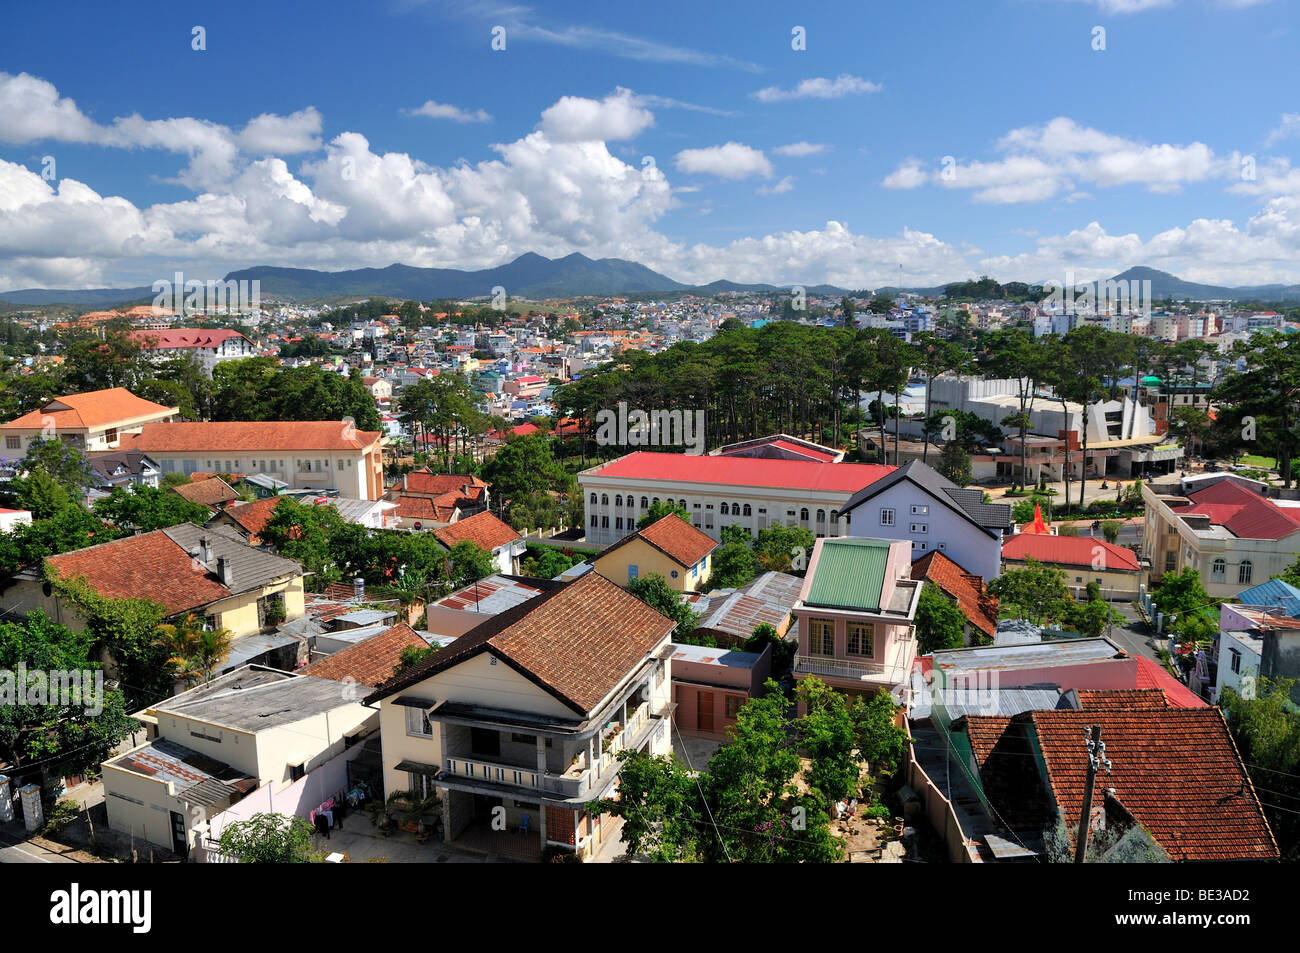 View over the colorful houses and rooftops of the Dalat capital, Central Highlands, Vietnam, Asia Stock Photo